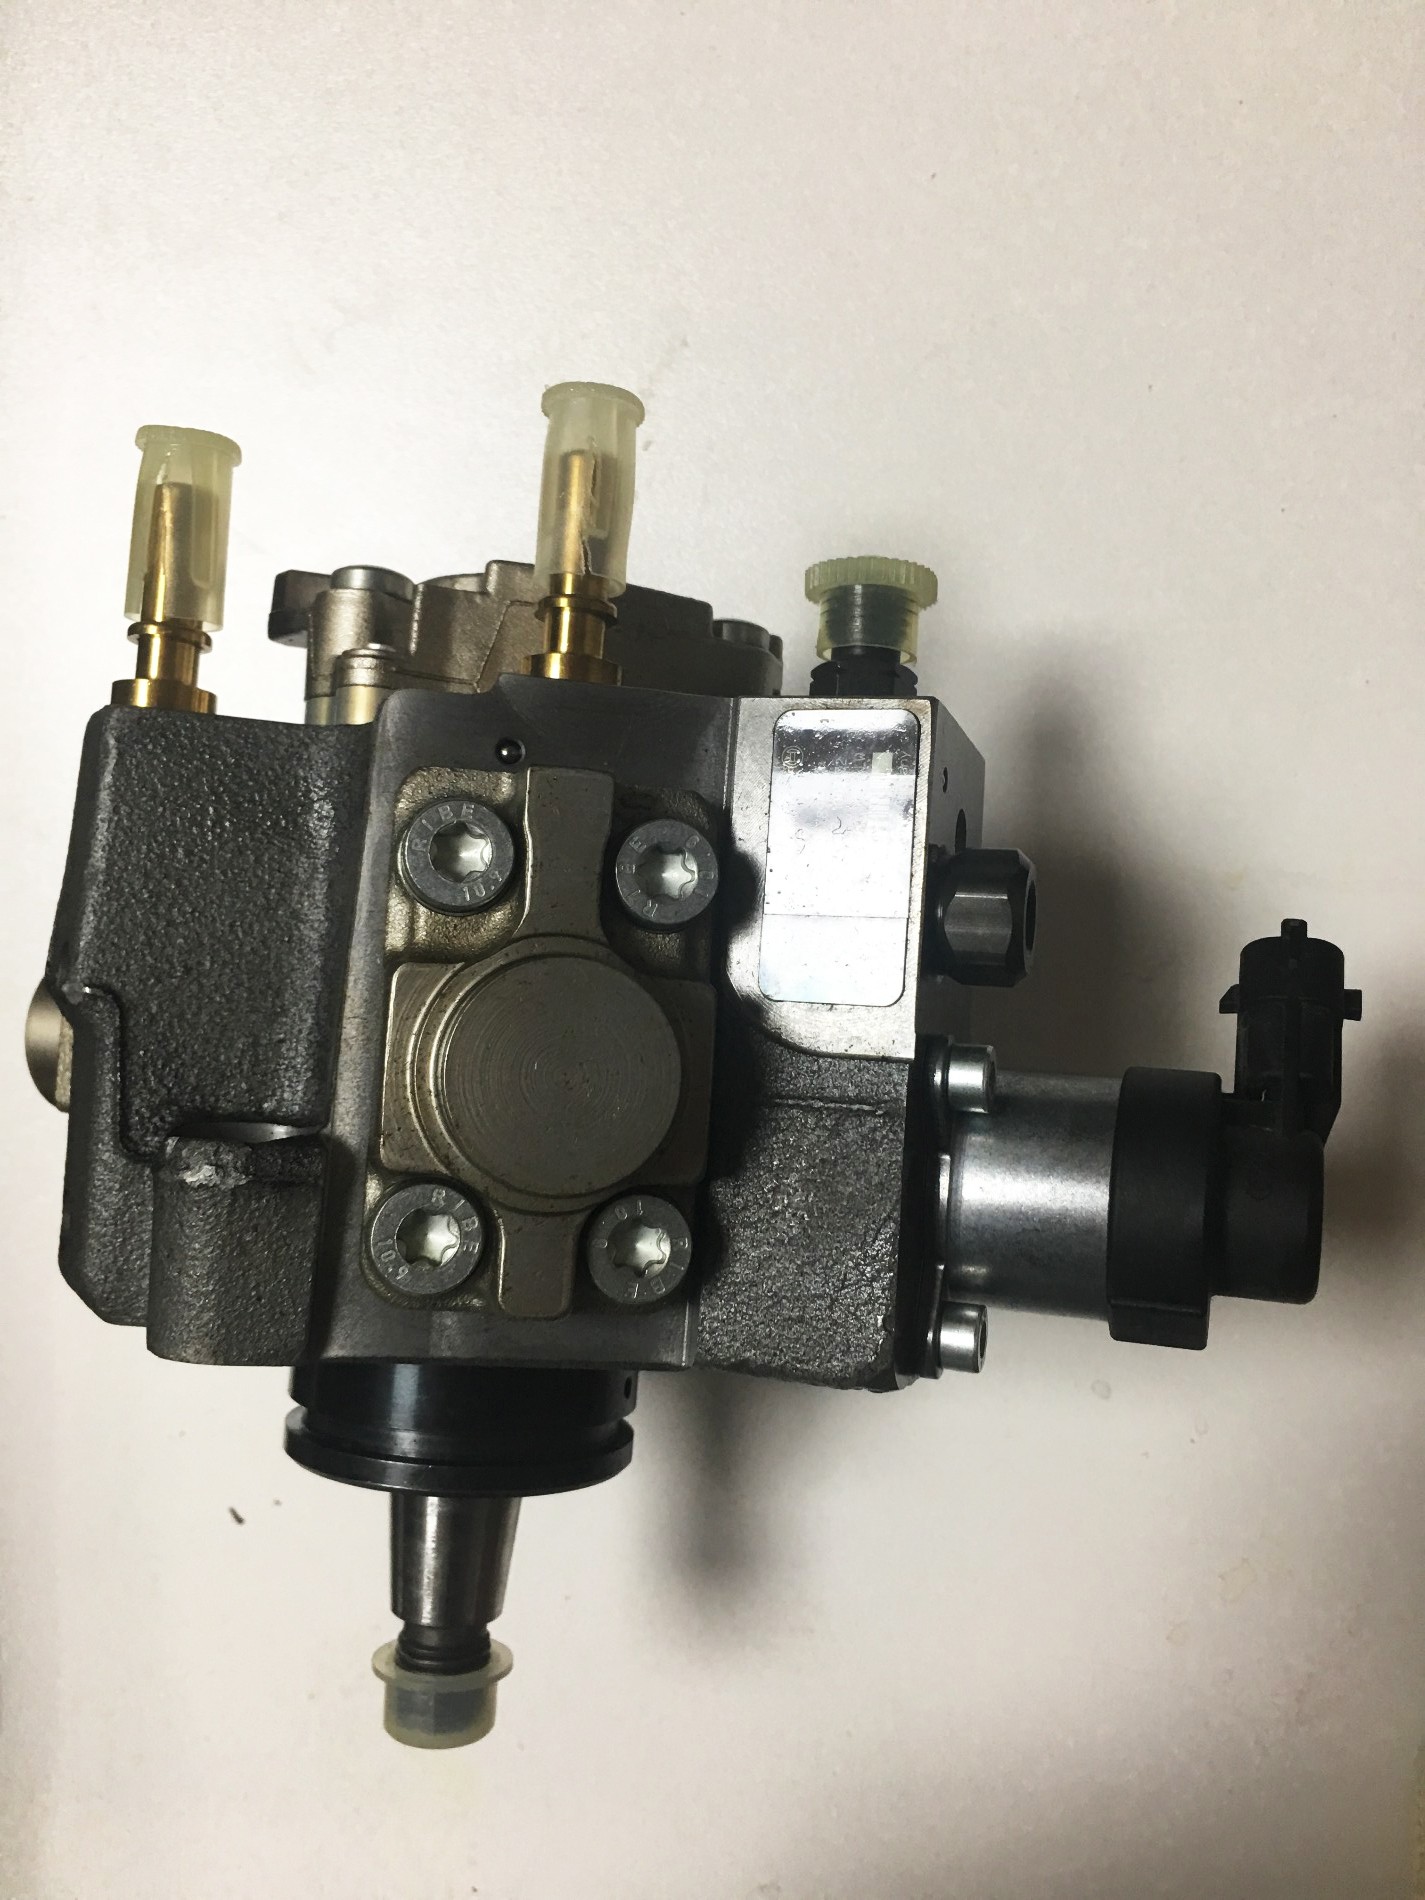 Comprar ISBe ISDe QSB Diesel Fuel Injection Pump 0445020119, ISBe ISDe QSB Diesel Fuel Injection Pump 0445020119 Precios, ISBe ISDe QSB Diesel Fuel Injection Pump 0445020119 Marcas, ISBe ISDe QSB Diesel Fuel Injection Pump 0445020119 Fabricante, ISBe ISDe QSB Diesel Fuel Injection Pump 0445020119 Citas, ISBe ISDe QSB Diesel Fuel Injection Pump 0445020119 Empresa.